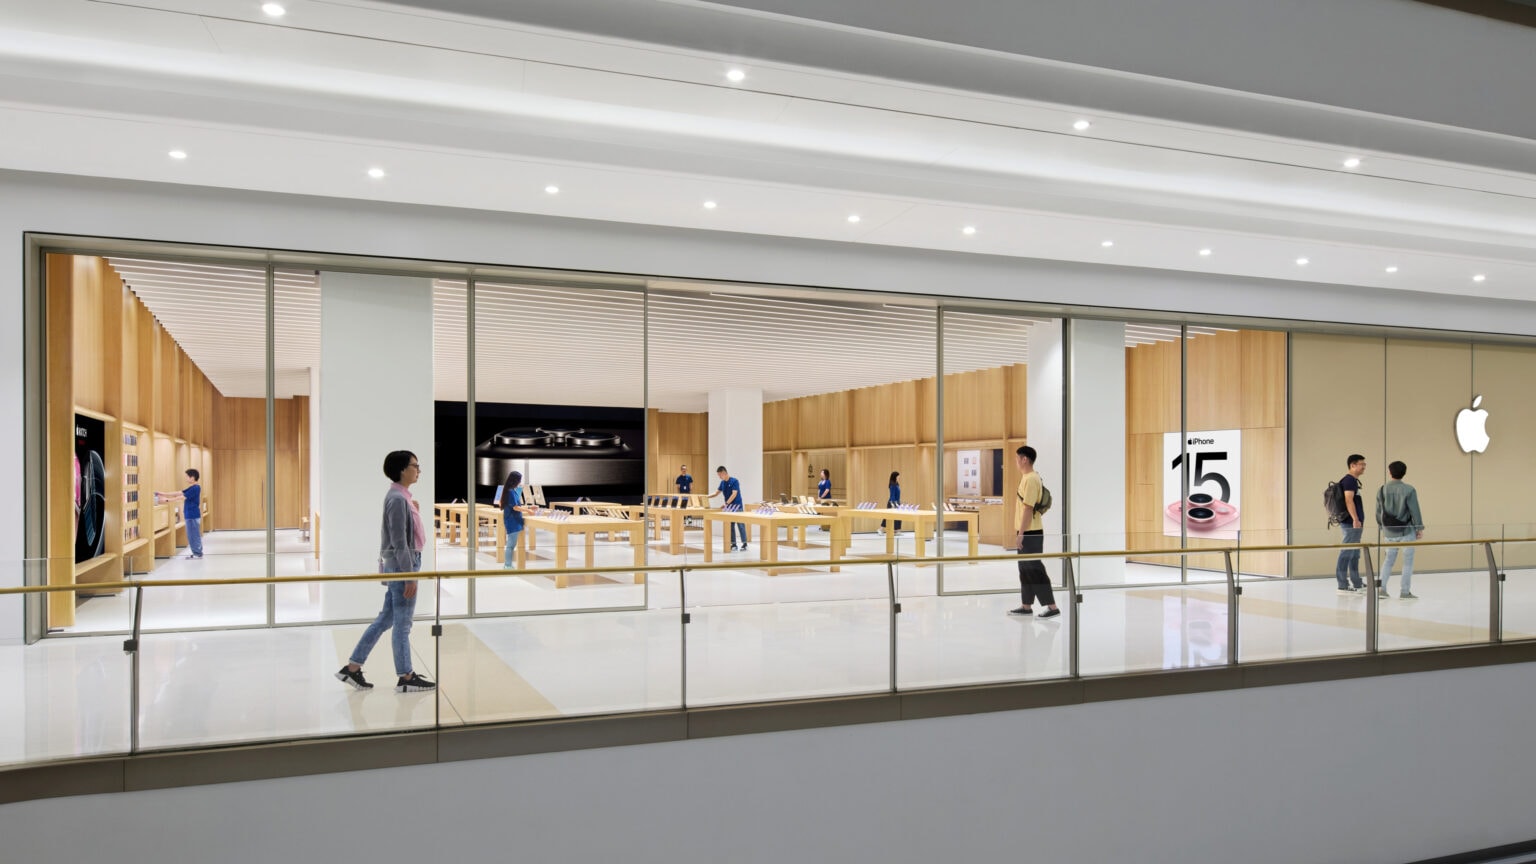 This is Apple's first store in the city of Wenzhou.